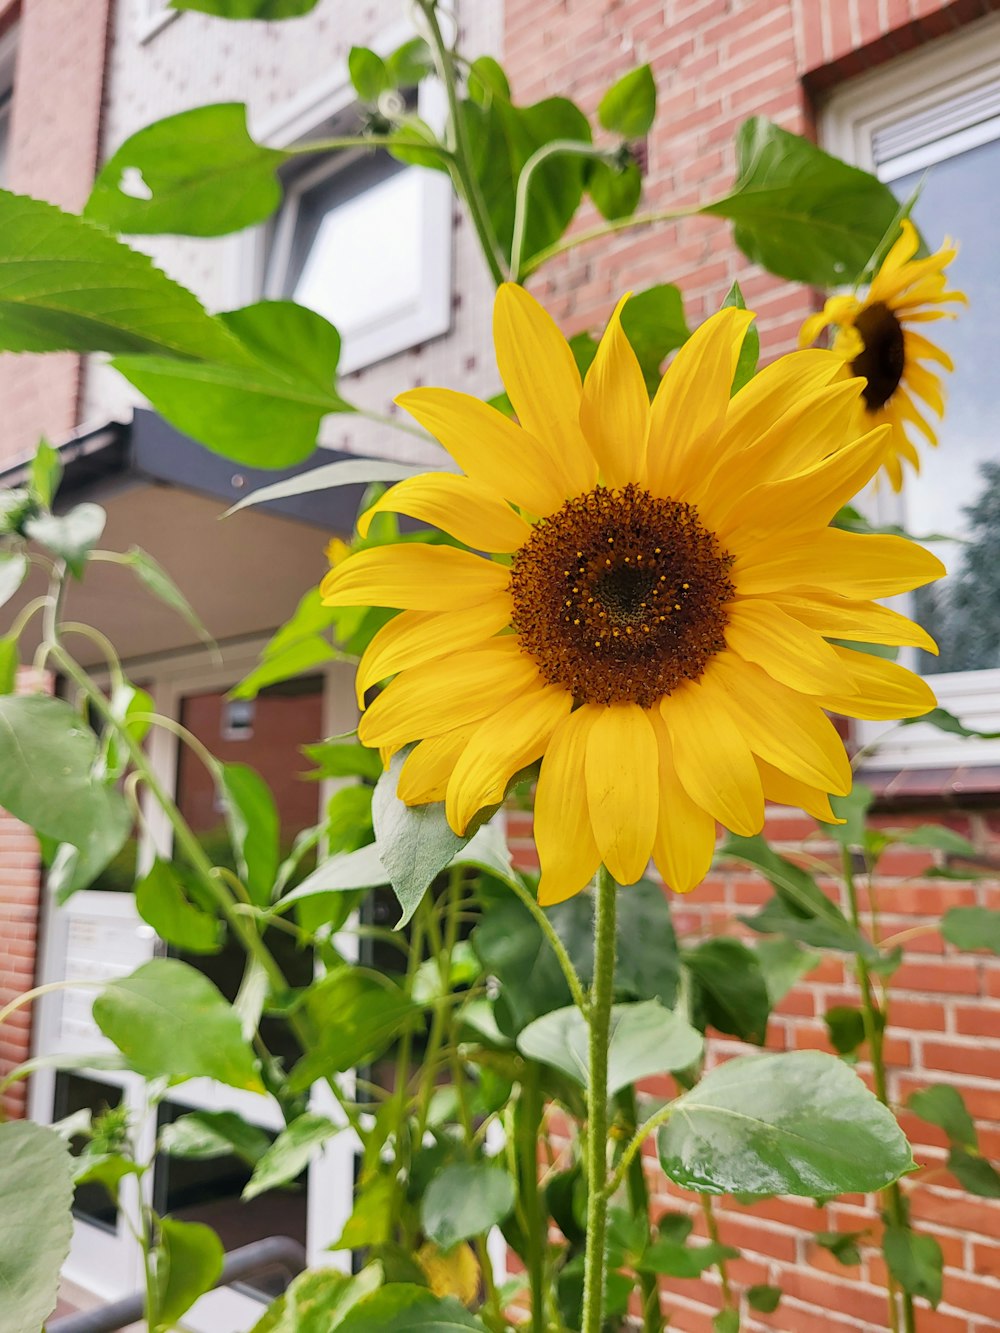 a sunflower in front of a brick building